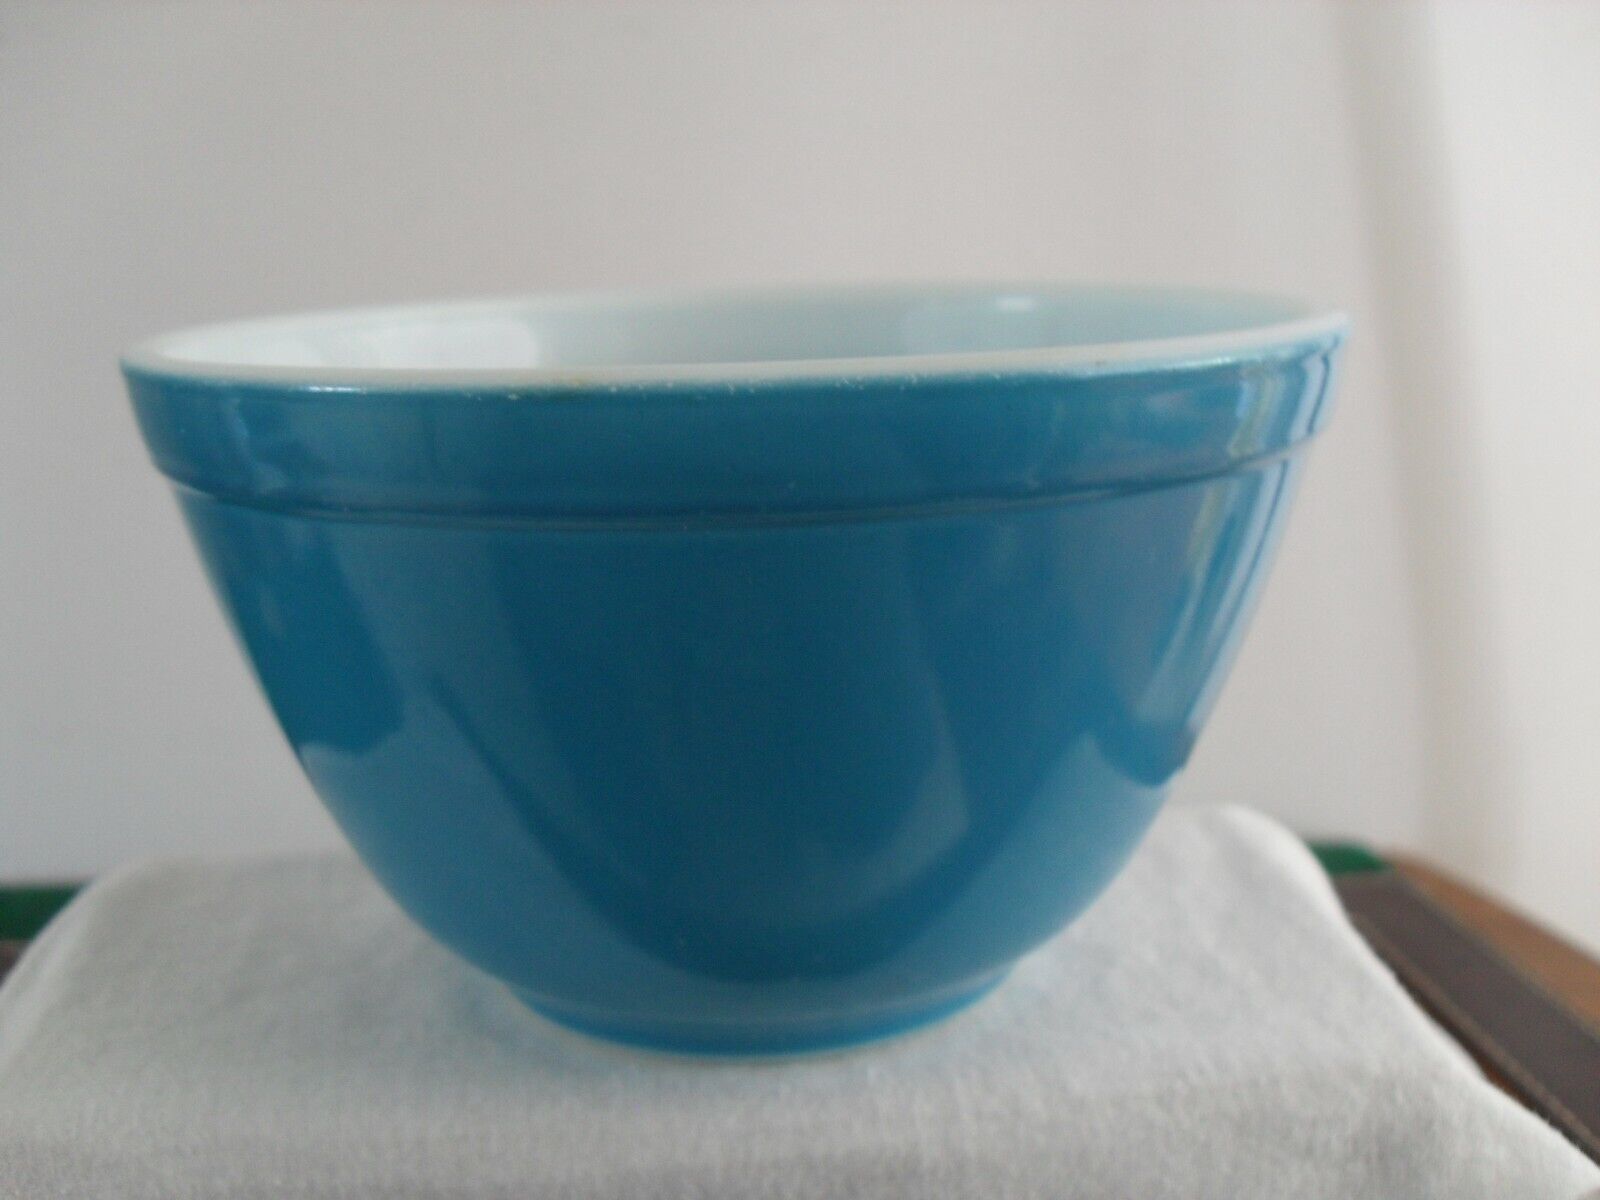  VTG. PYREX ,  #401 PRIMARY BLUE NESTING  BOW 1 1/2 Pint Made in USA   